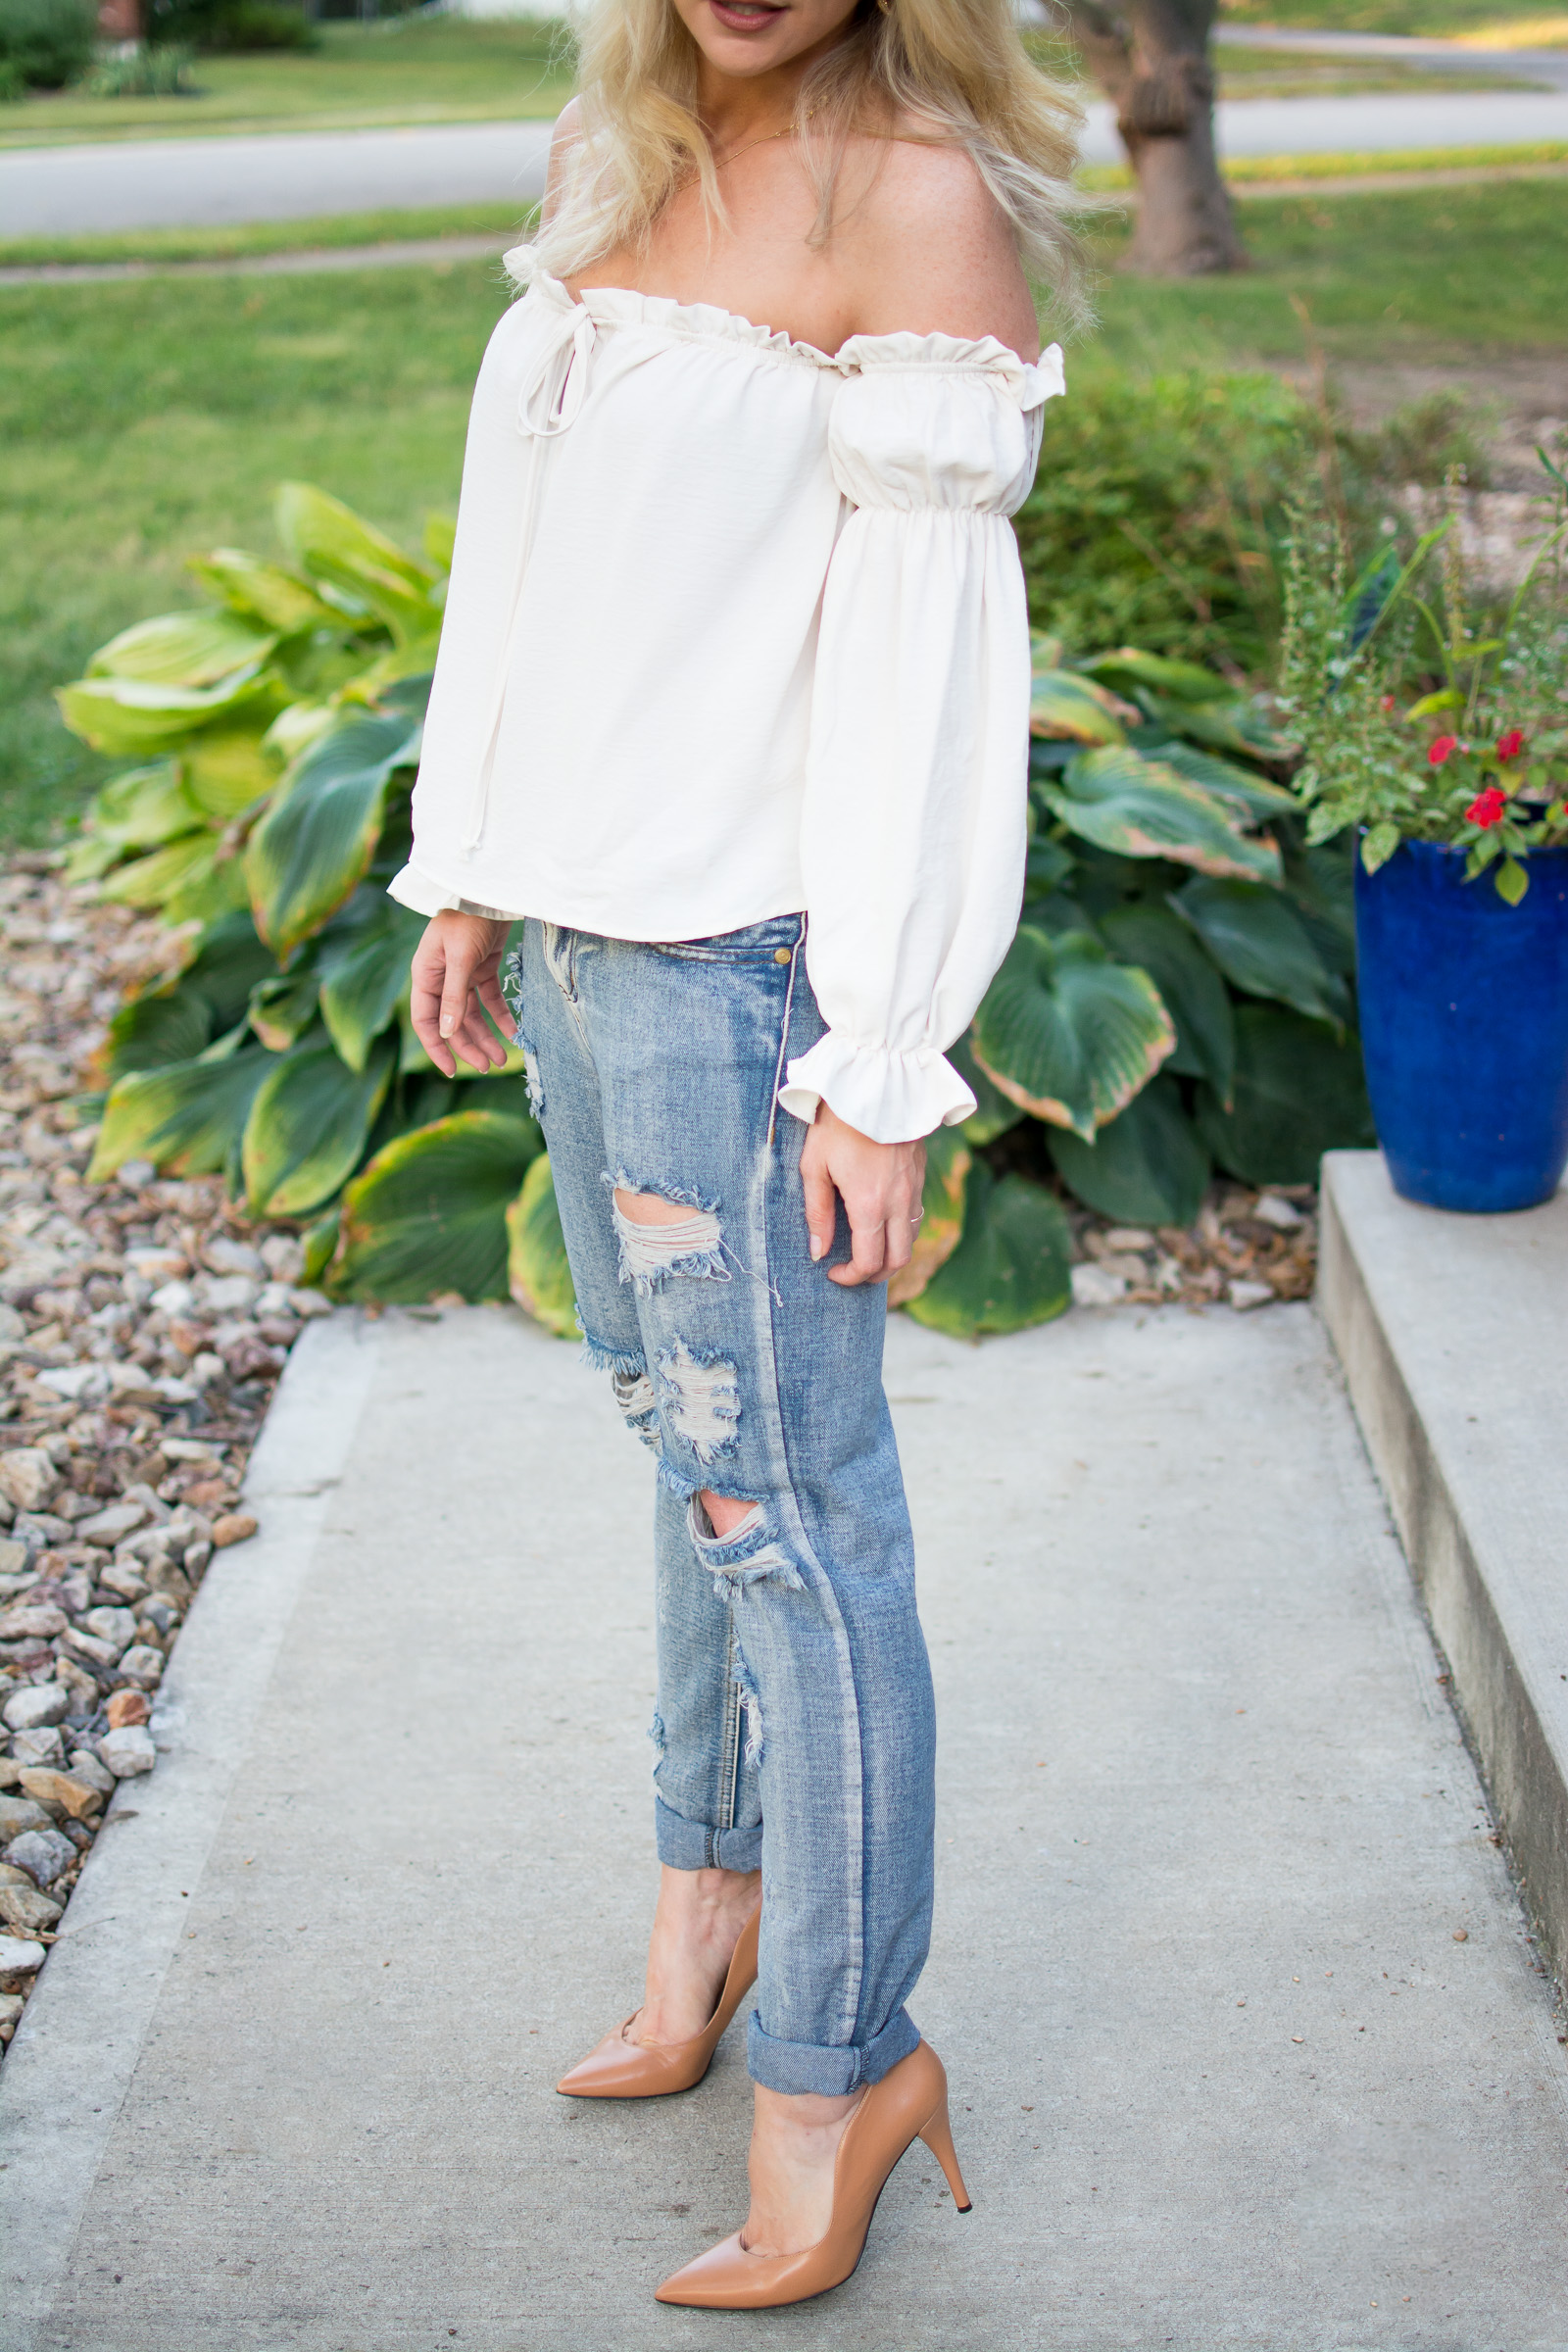 Girly and Tough: Flouncy Blouse with One Teaspoon Boyfriend Jeans. | Ashley from LSR